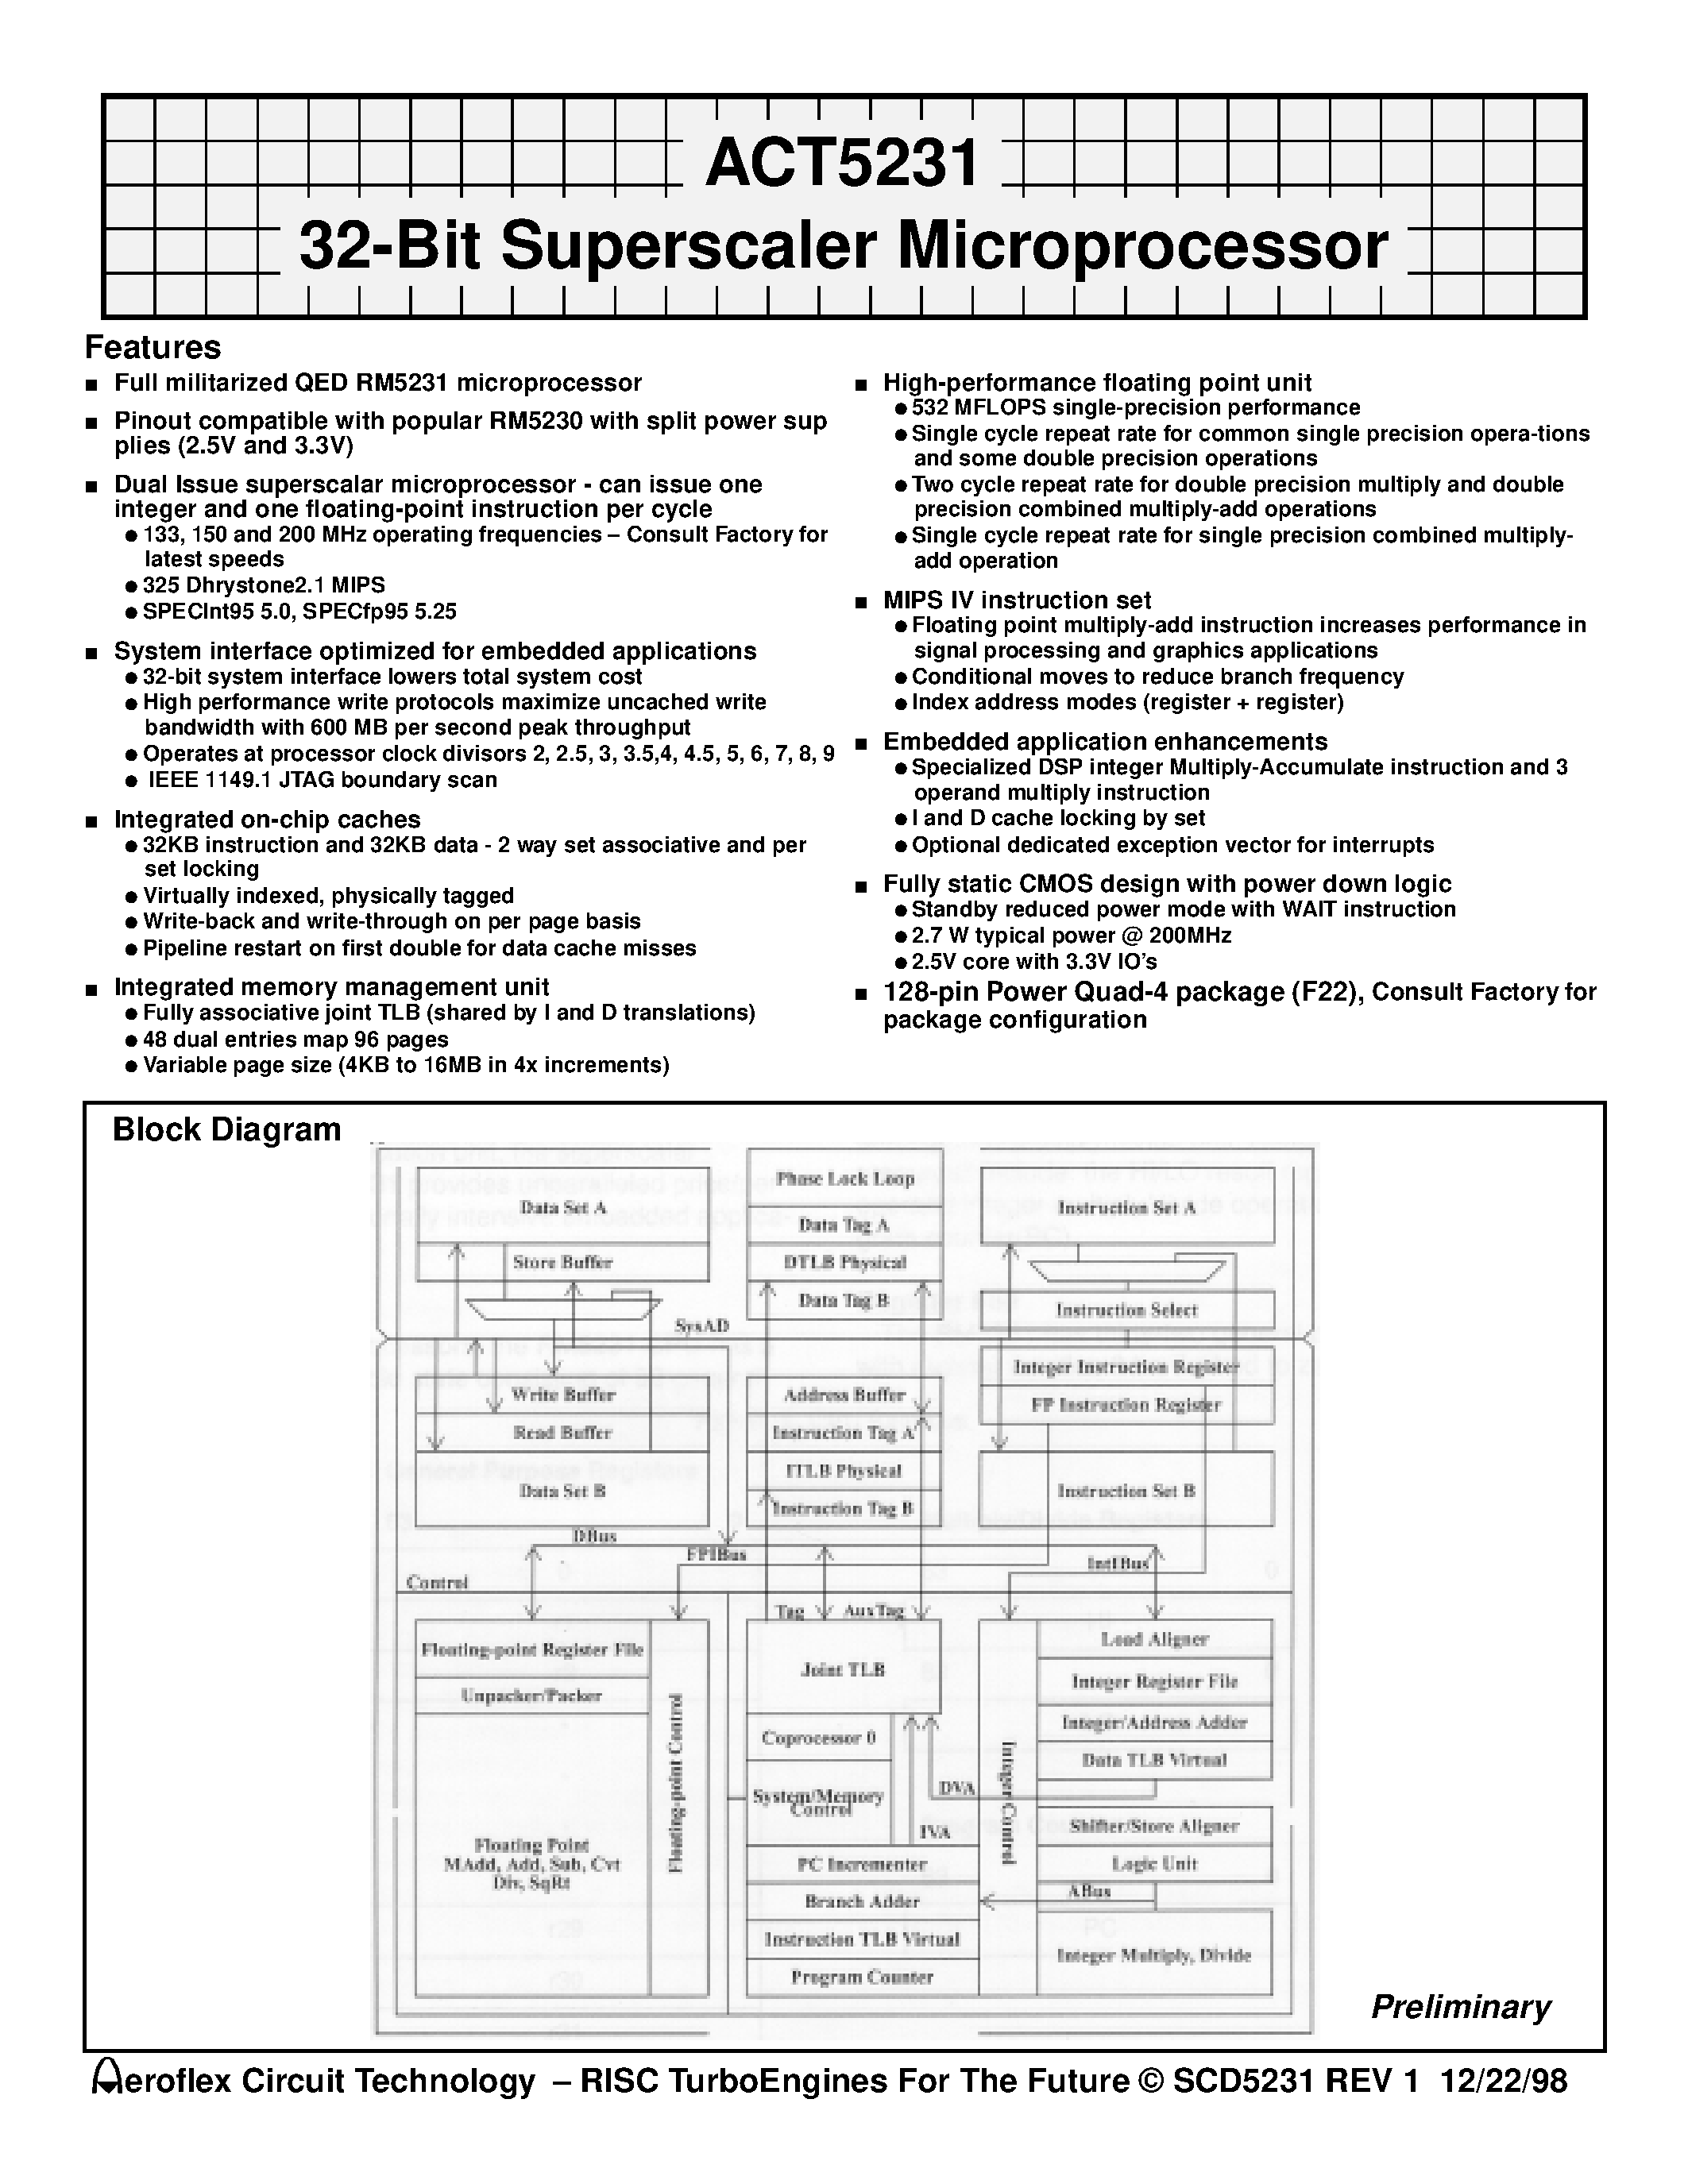 Datasheet ACT-5231PC-133F22C - ACT5231 32-Bit Superscaler Microprocessor page 1